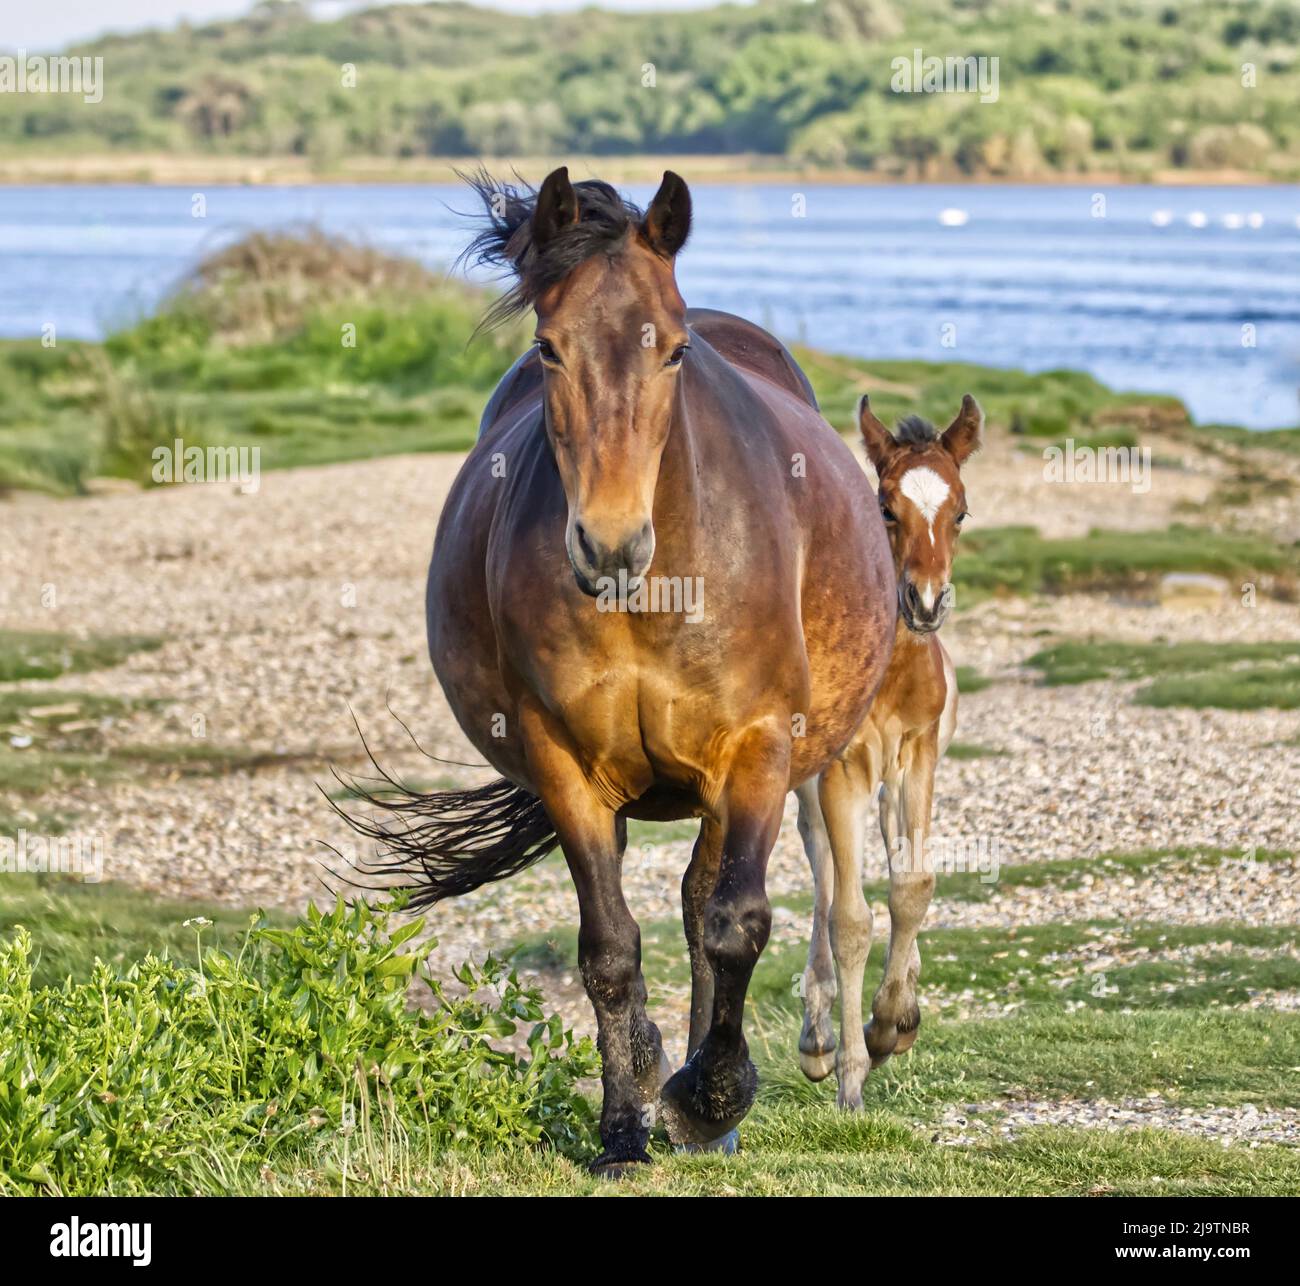 A heavily pregnant mare and her foal Stock Photo